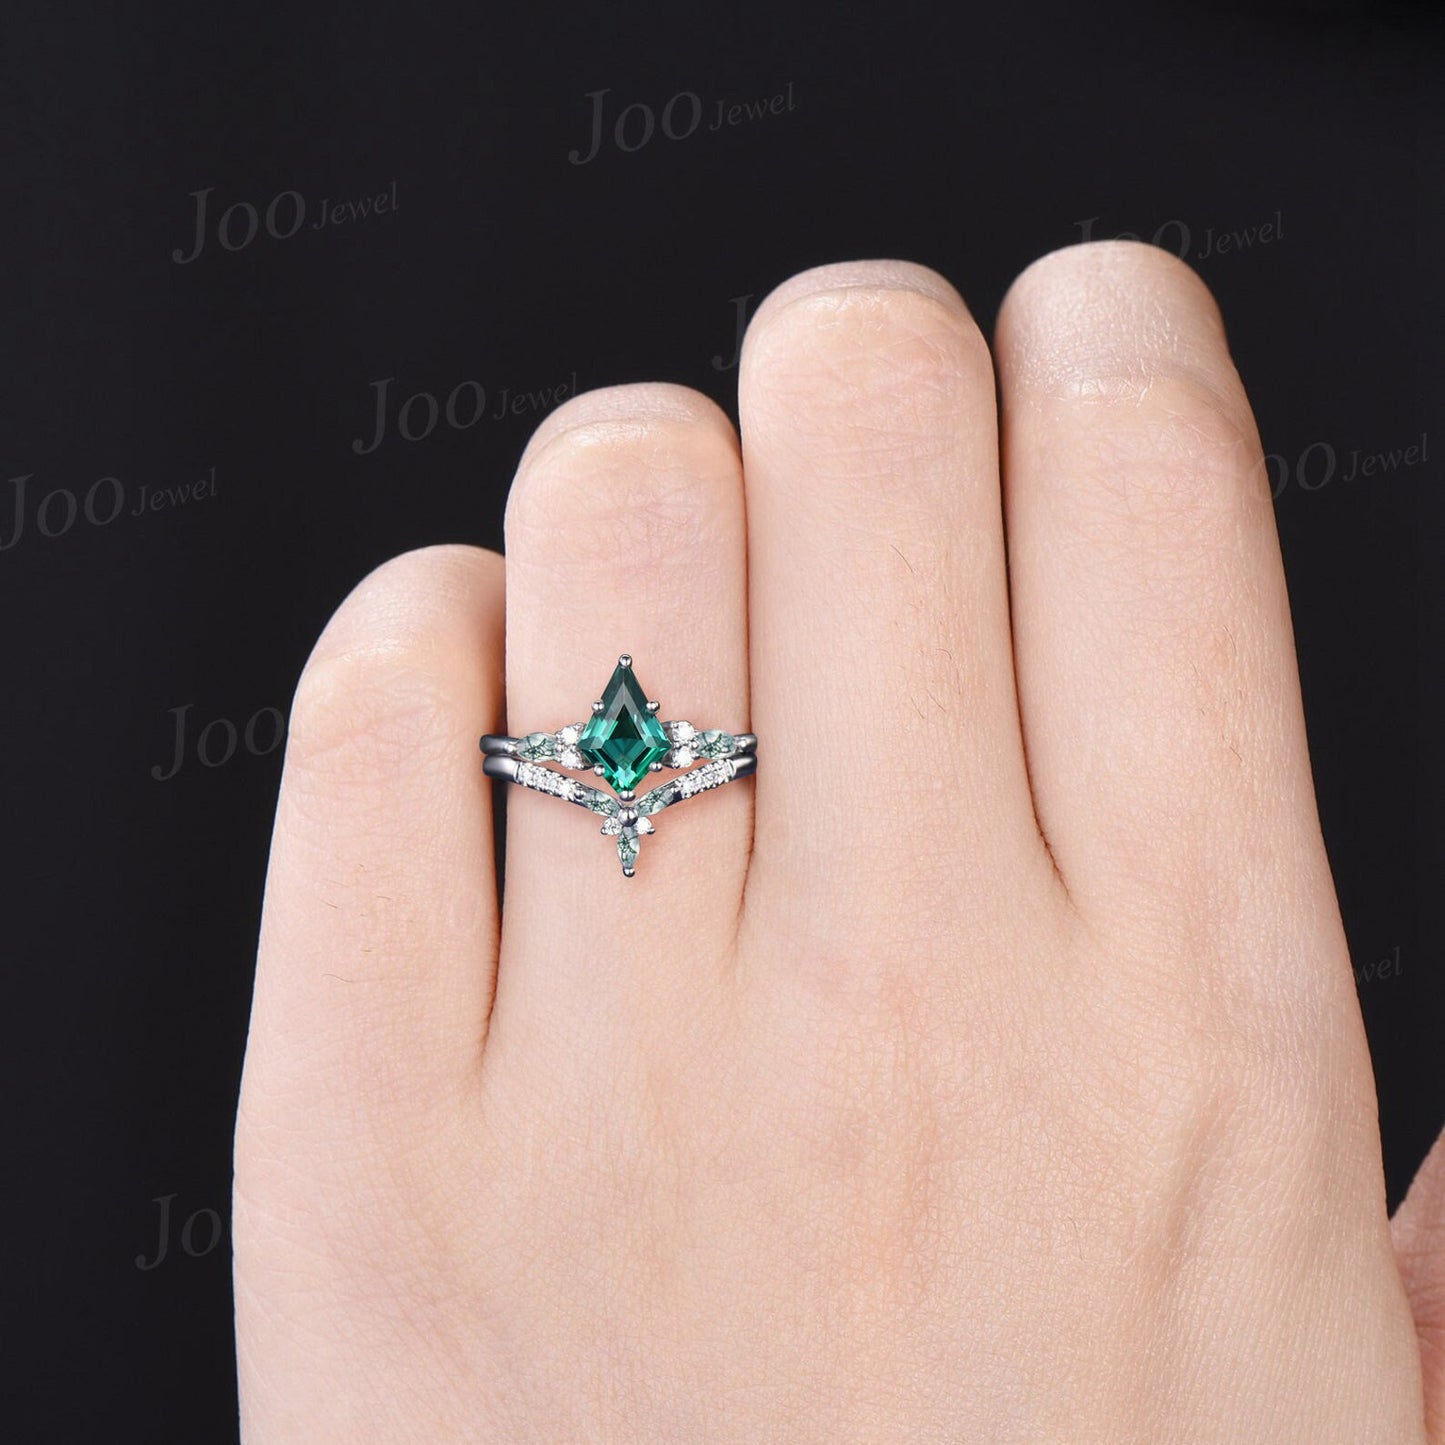 Vintage 1CT Kite Cut Green Emerald Engagement Ring Set 14K White Gold Marquise Moss Agate Moissanite Ring Women Unique Emerald Wedding Ring